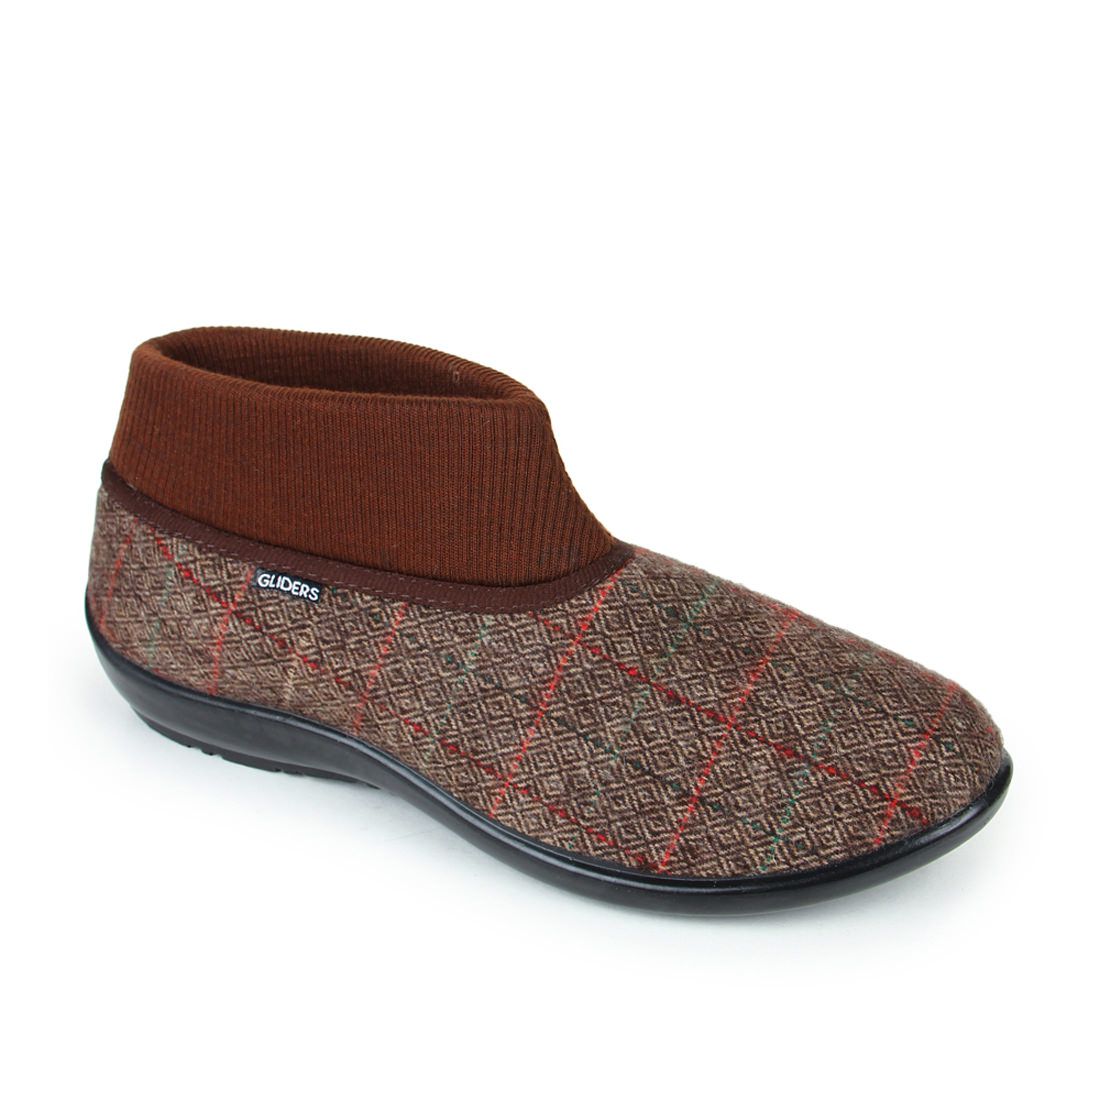     			Gliders - Brown  Women's Espadrilles Shoes